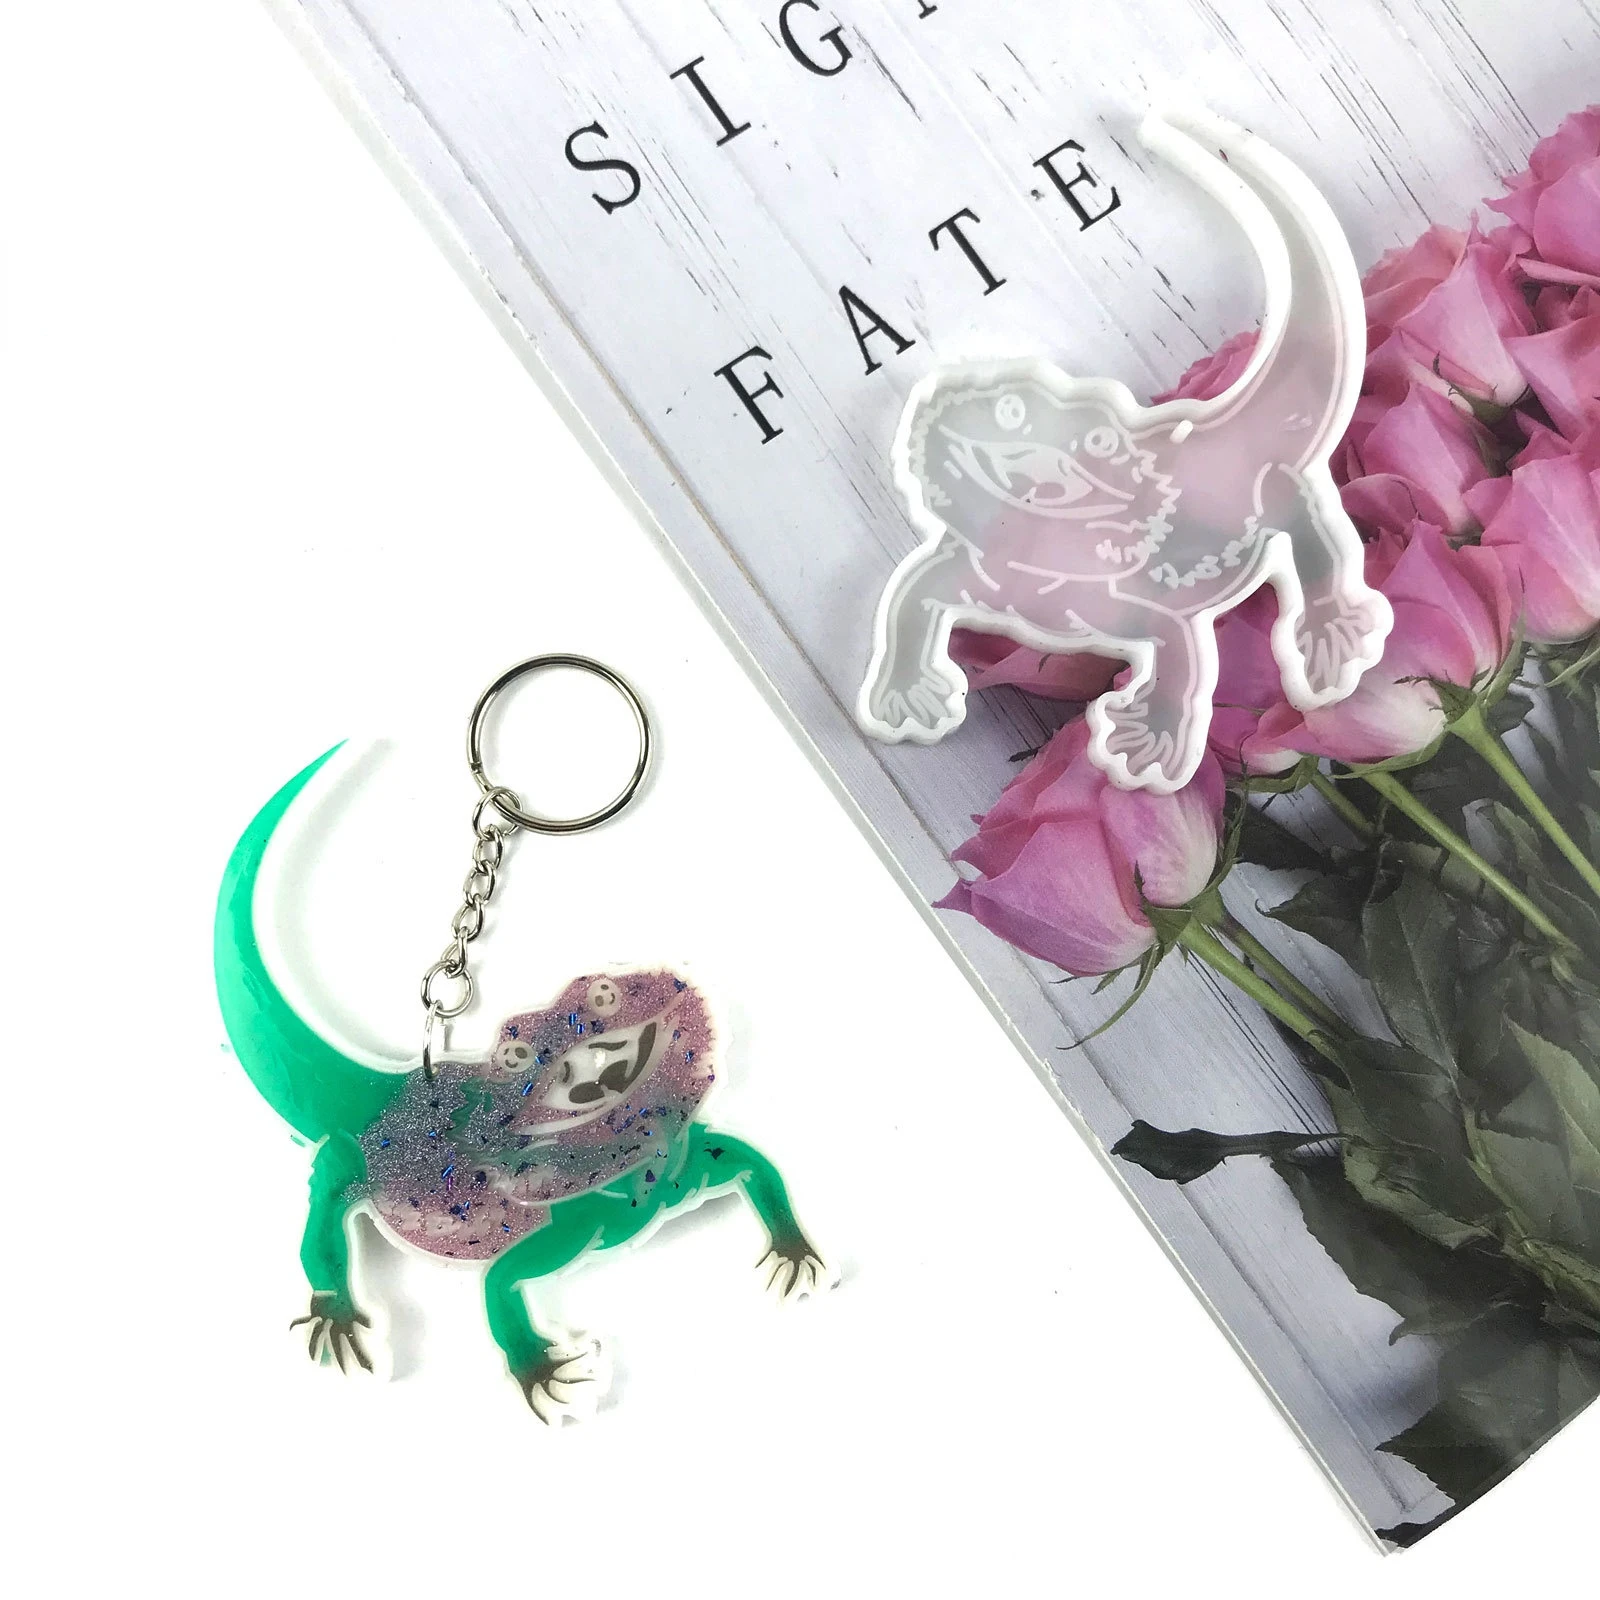 Lizard Keychain Resin Mold Creative Reptilian Silicone Mold DIY Wildness Nature Resin Cabrite Keyring for Boyfriends